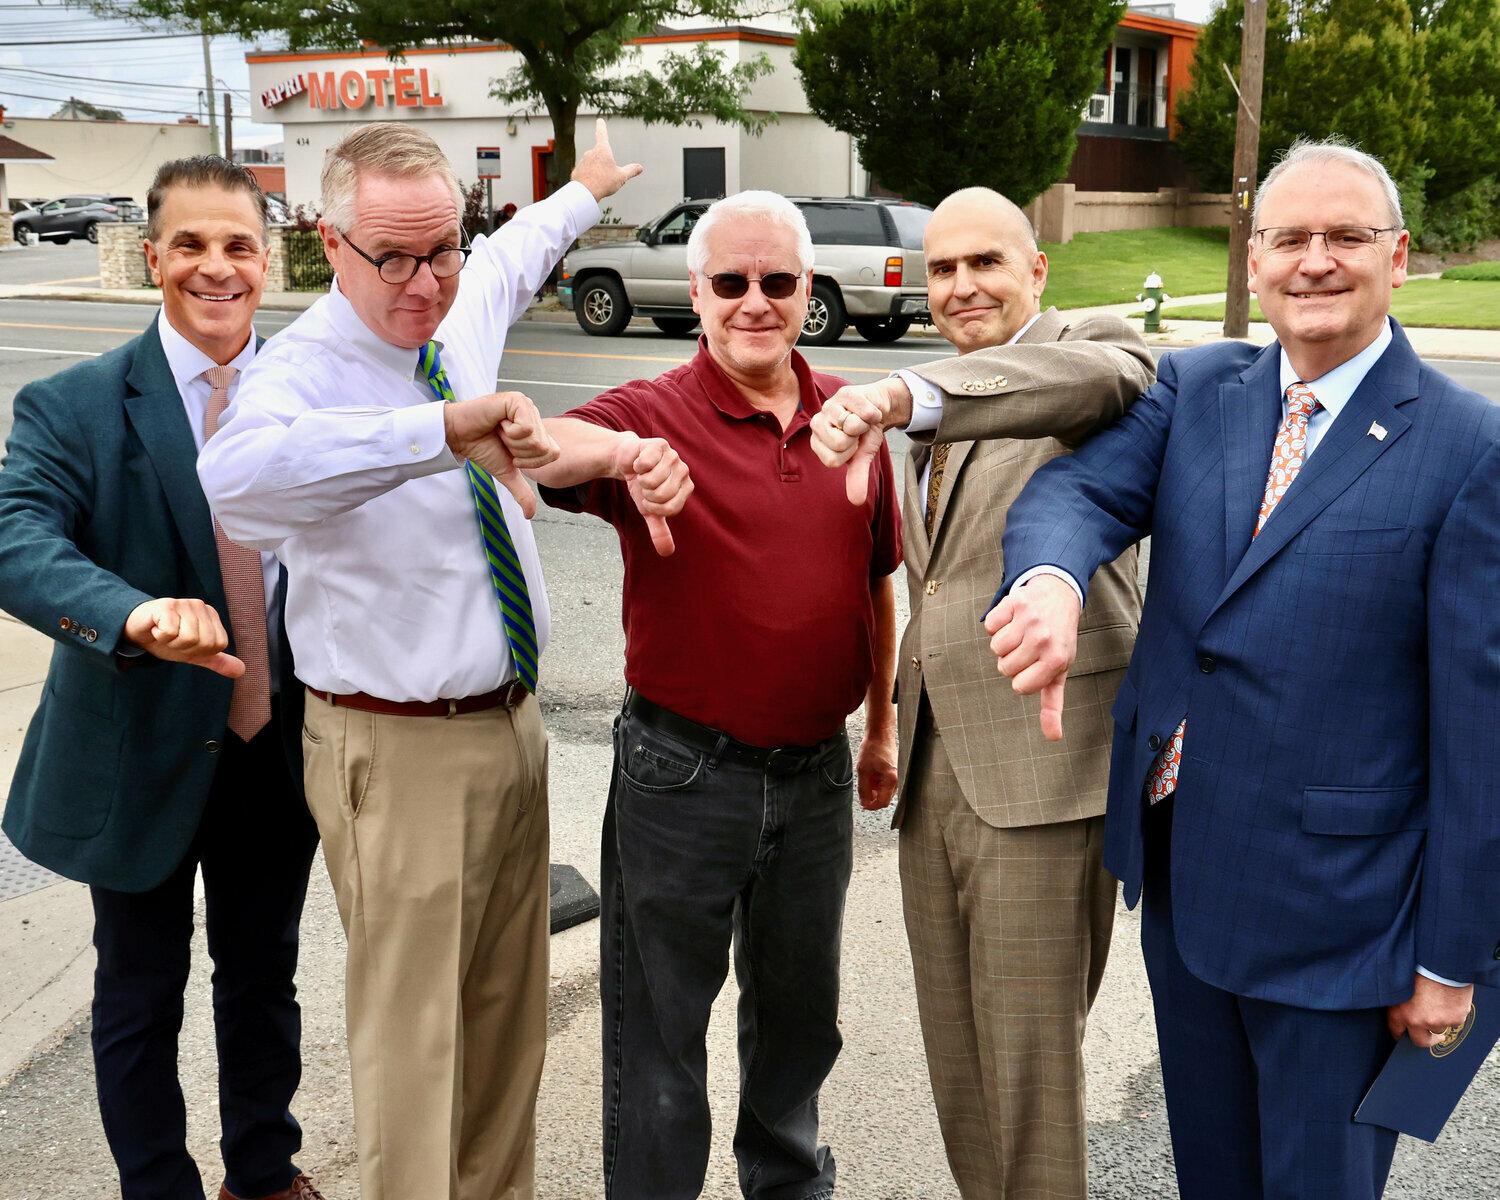 Hempstead Town Supervisor Don Clavin, along with Councilman Tom Muscarella, left, and Nassau County legislators Bill Gaylor and John Giuffré, call for the Capri Motor Inn in West Hempstead to be closed. To do that, however, Muscarella’s colleagues on the town board first had to declare the Hempstead Turnpike inn a public nuisance.